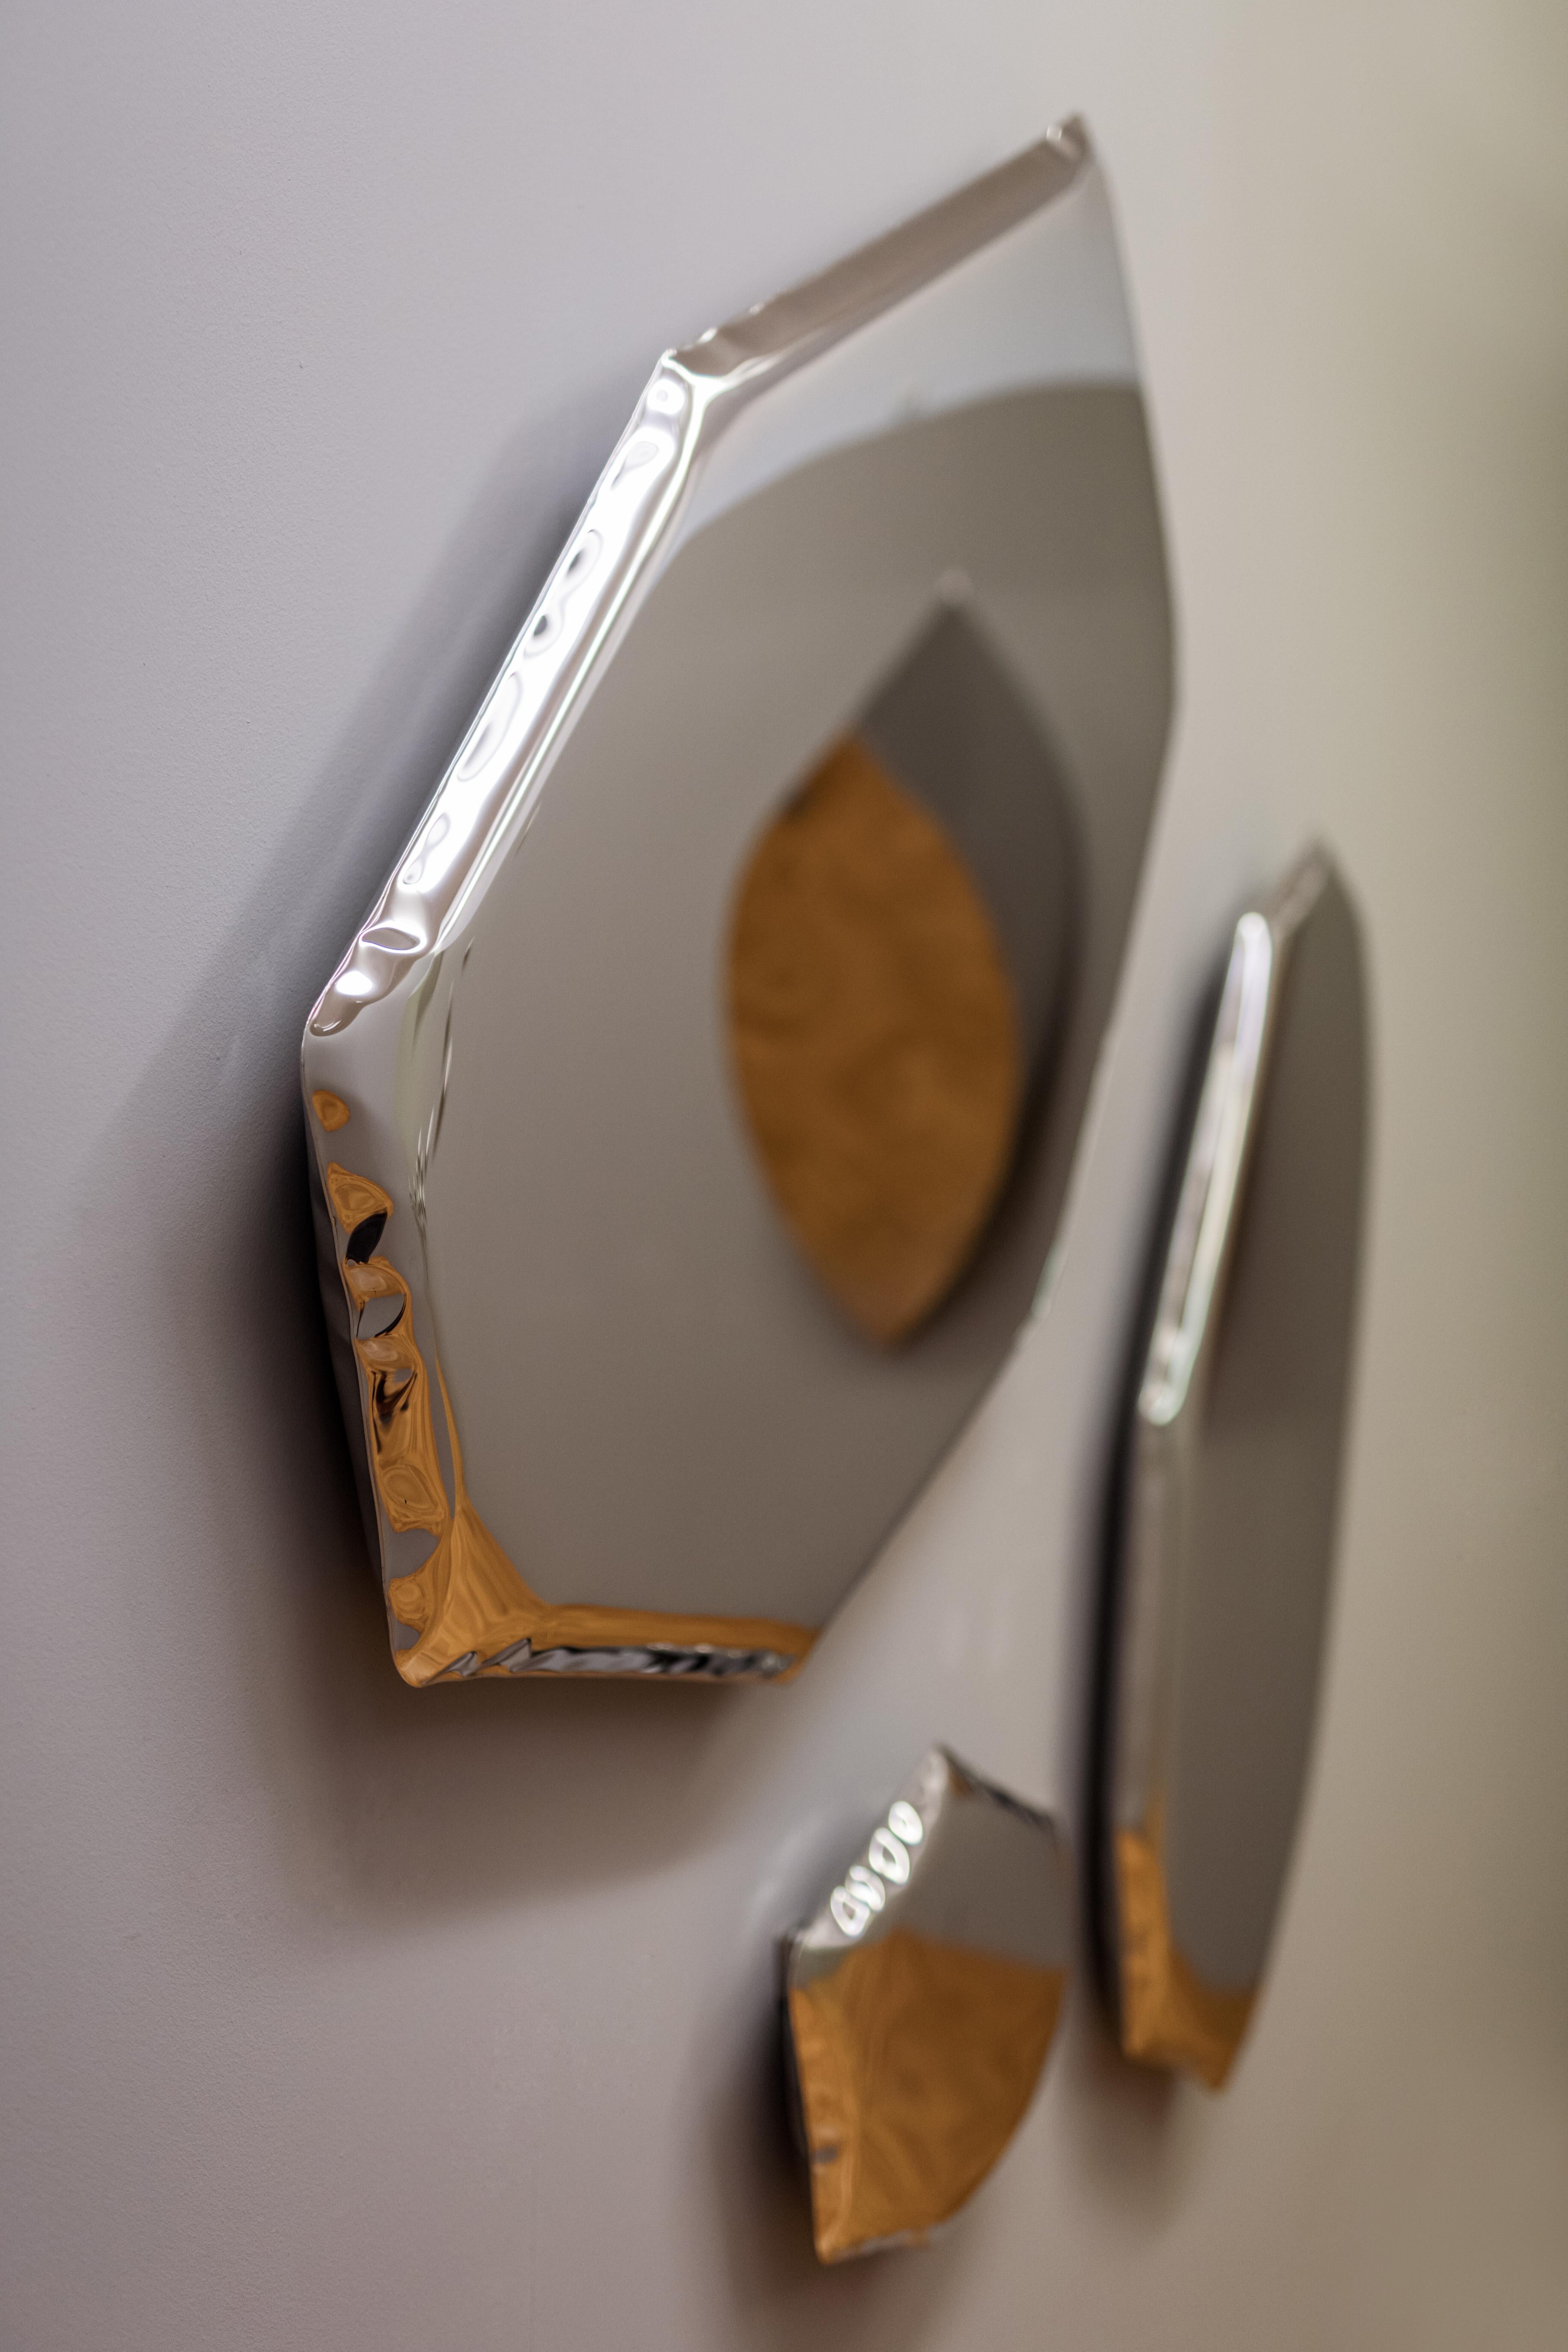 Contemporary Tafla Mirror 'C4' in Polished Stainless Steel by Zieta, In stock For Sale